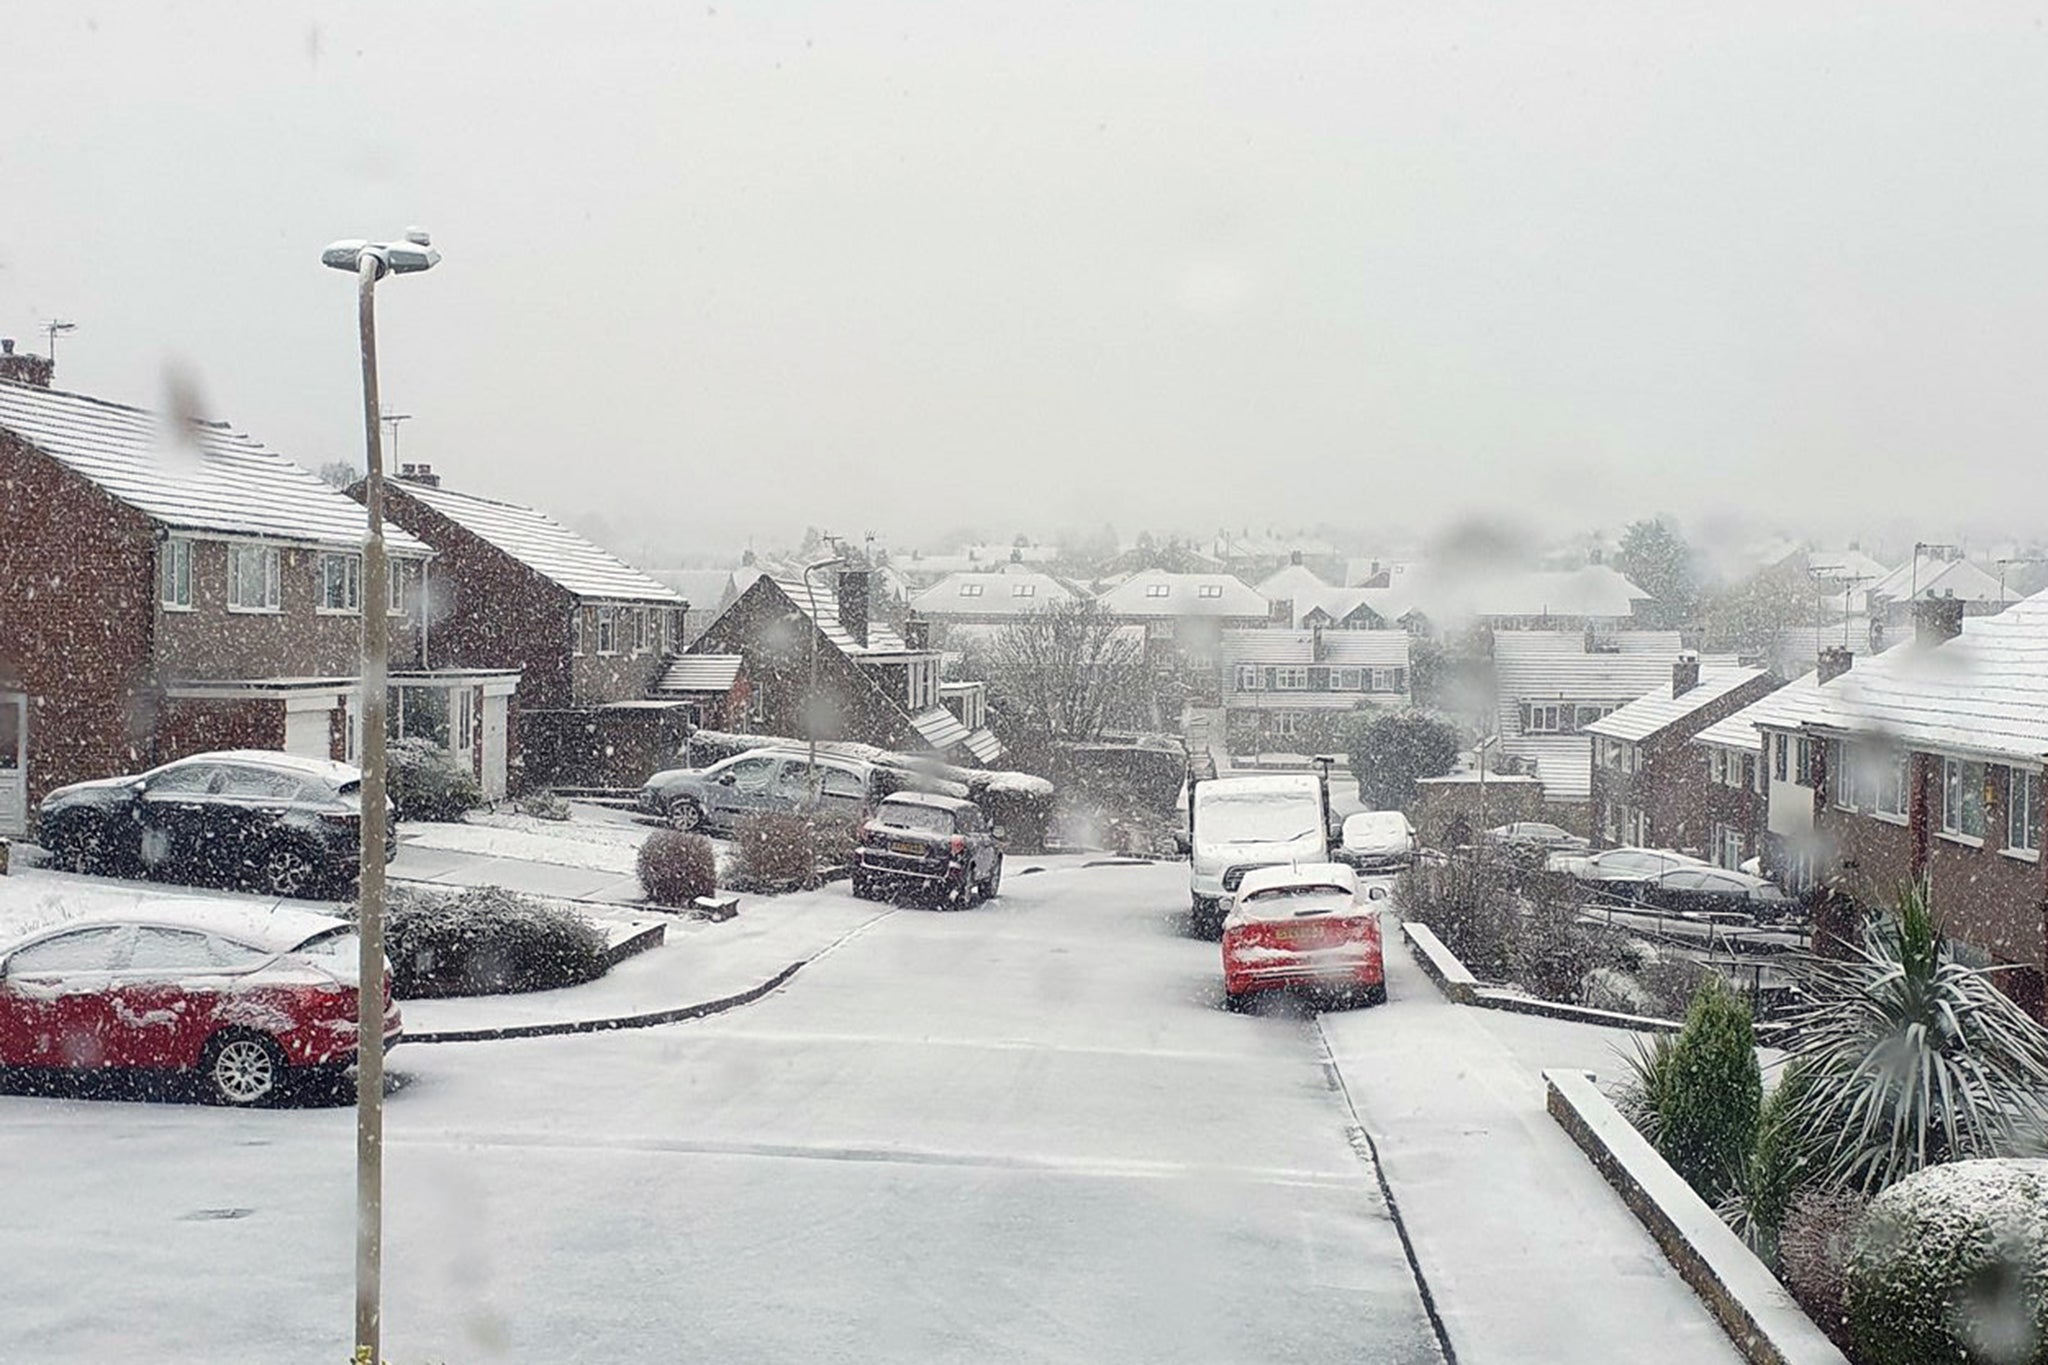 More than 100 schools have closed as snow hits the UK